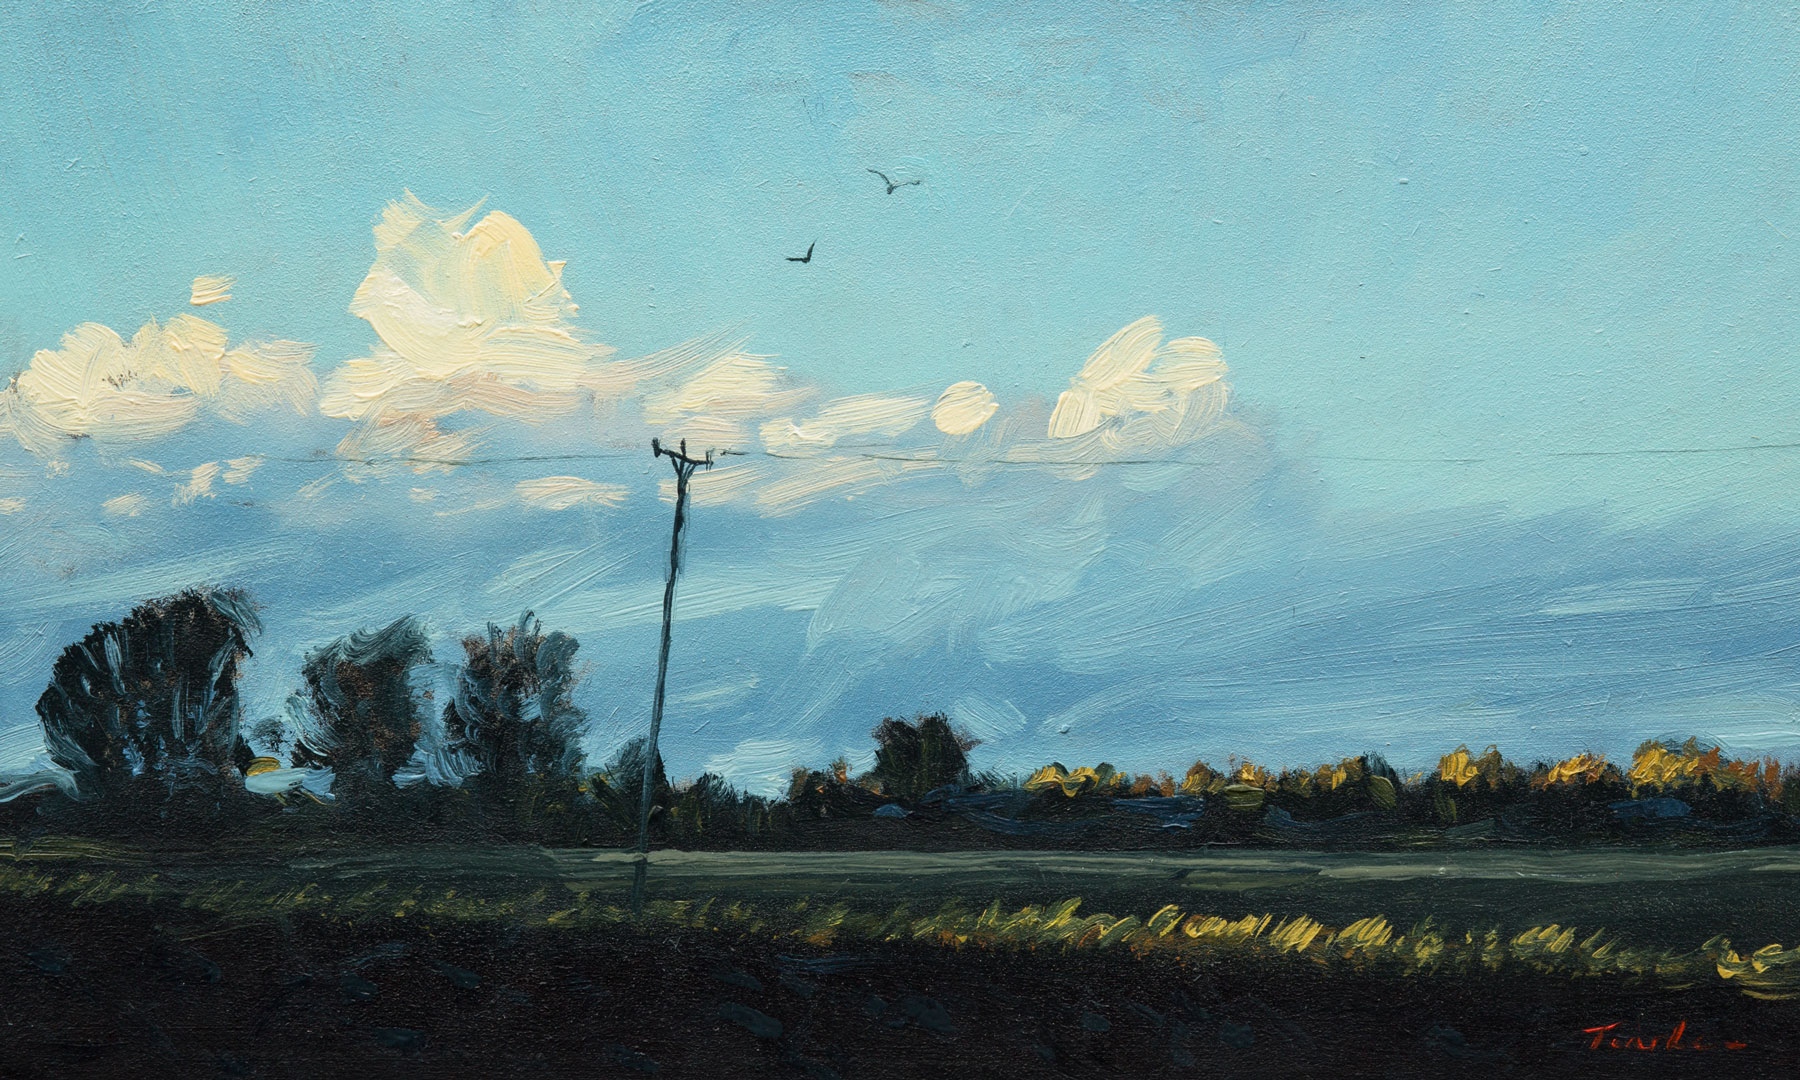 Fenland Painting - Distant Clouds by Nick Tearle - Fenland Artist